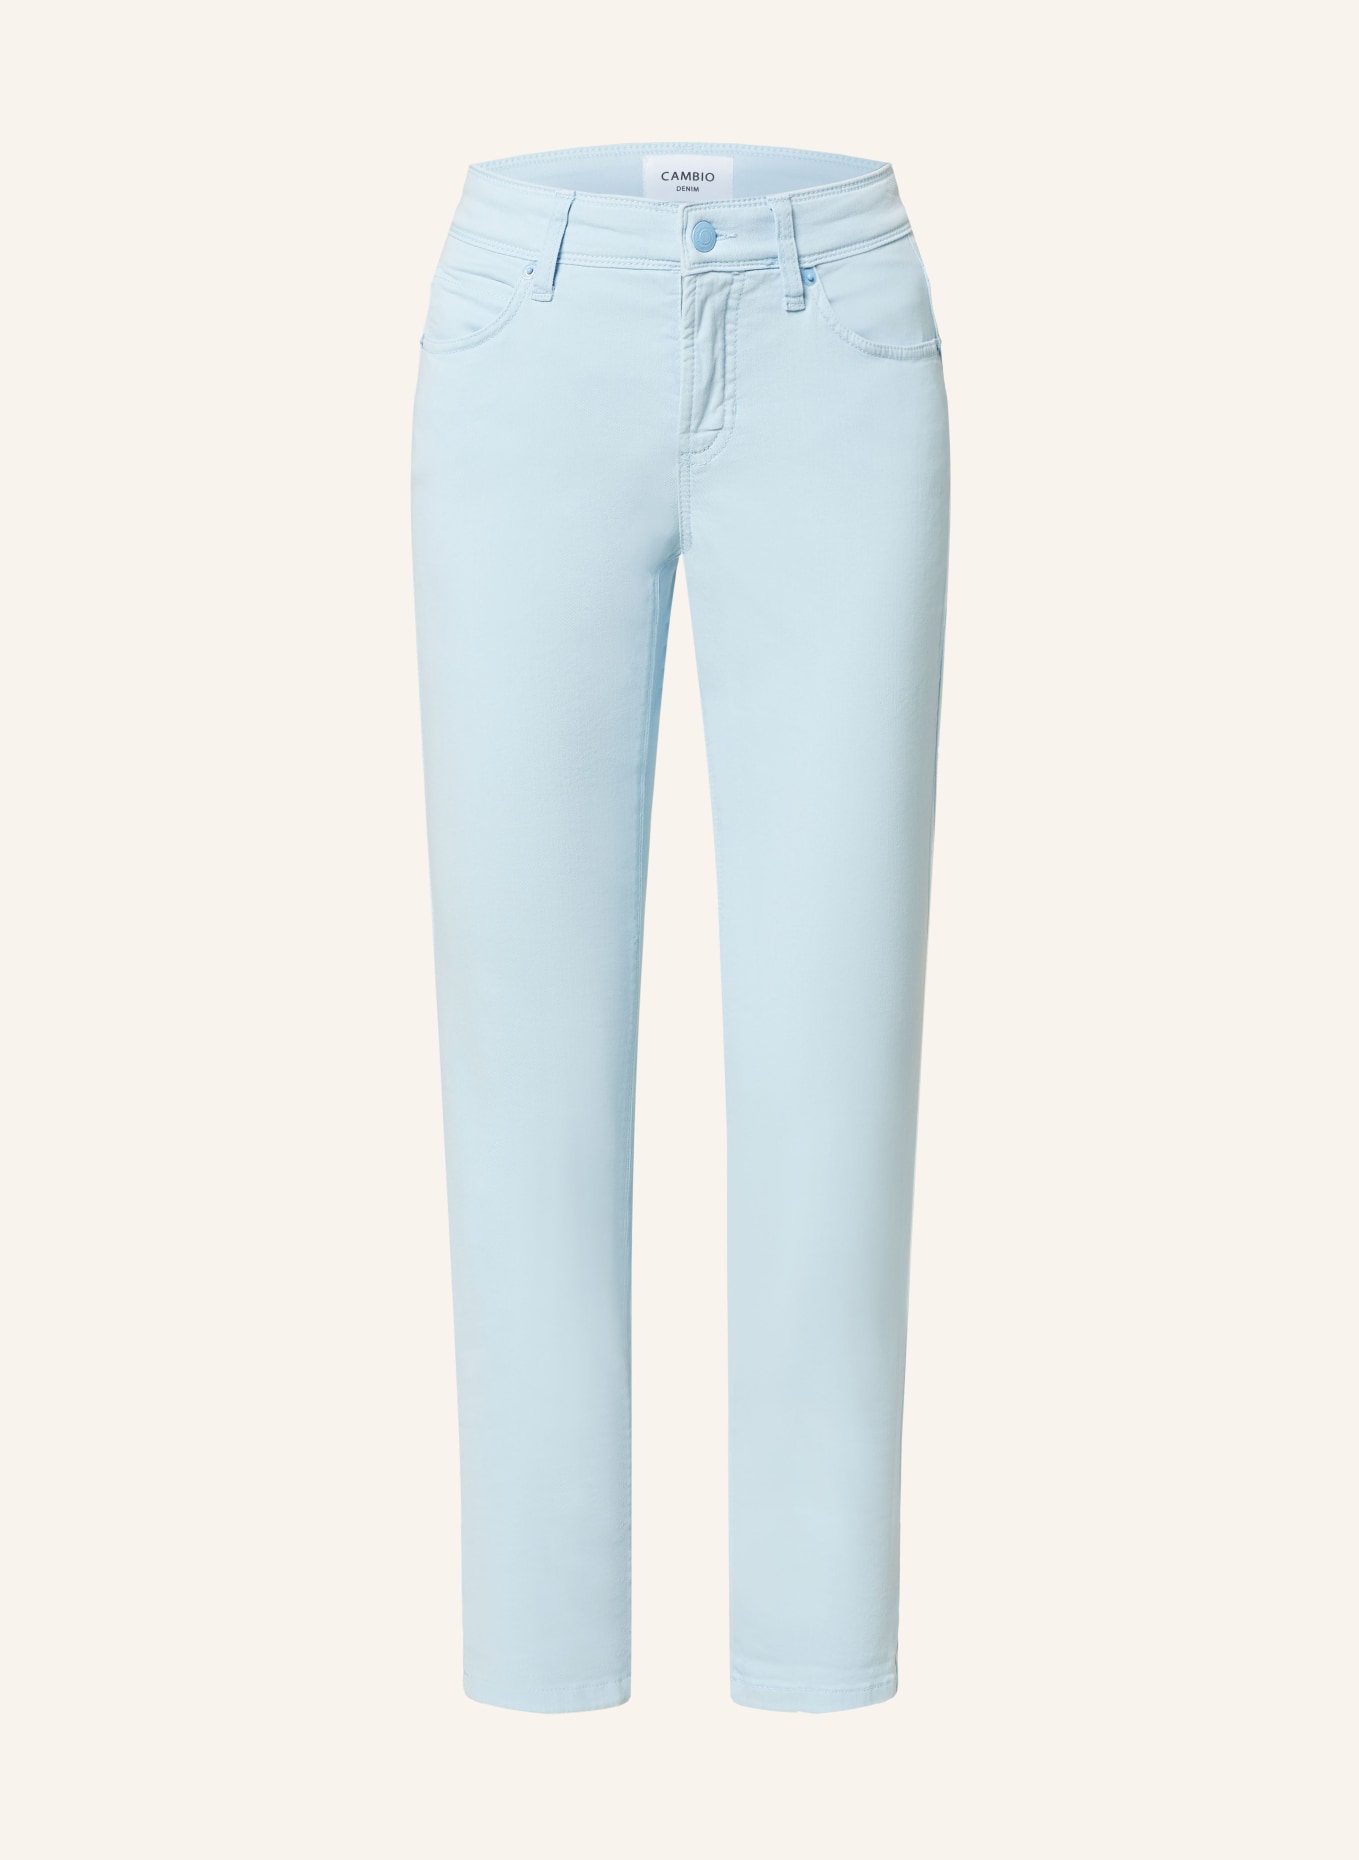 CAMBIO 7/8 jeans PIPER, Color: 408 airy blue (Image 1)